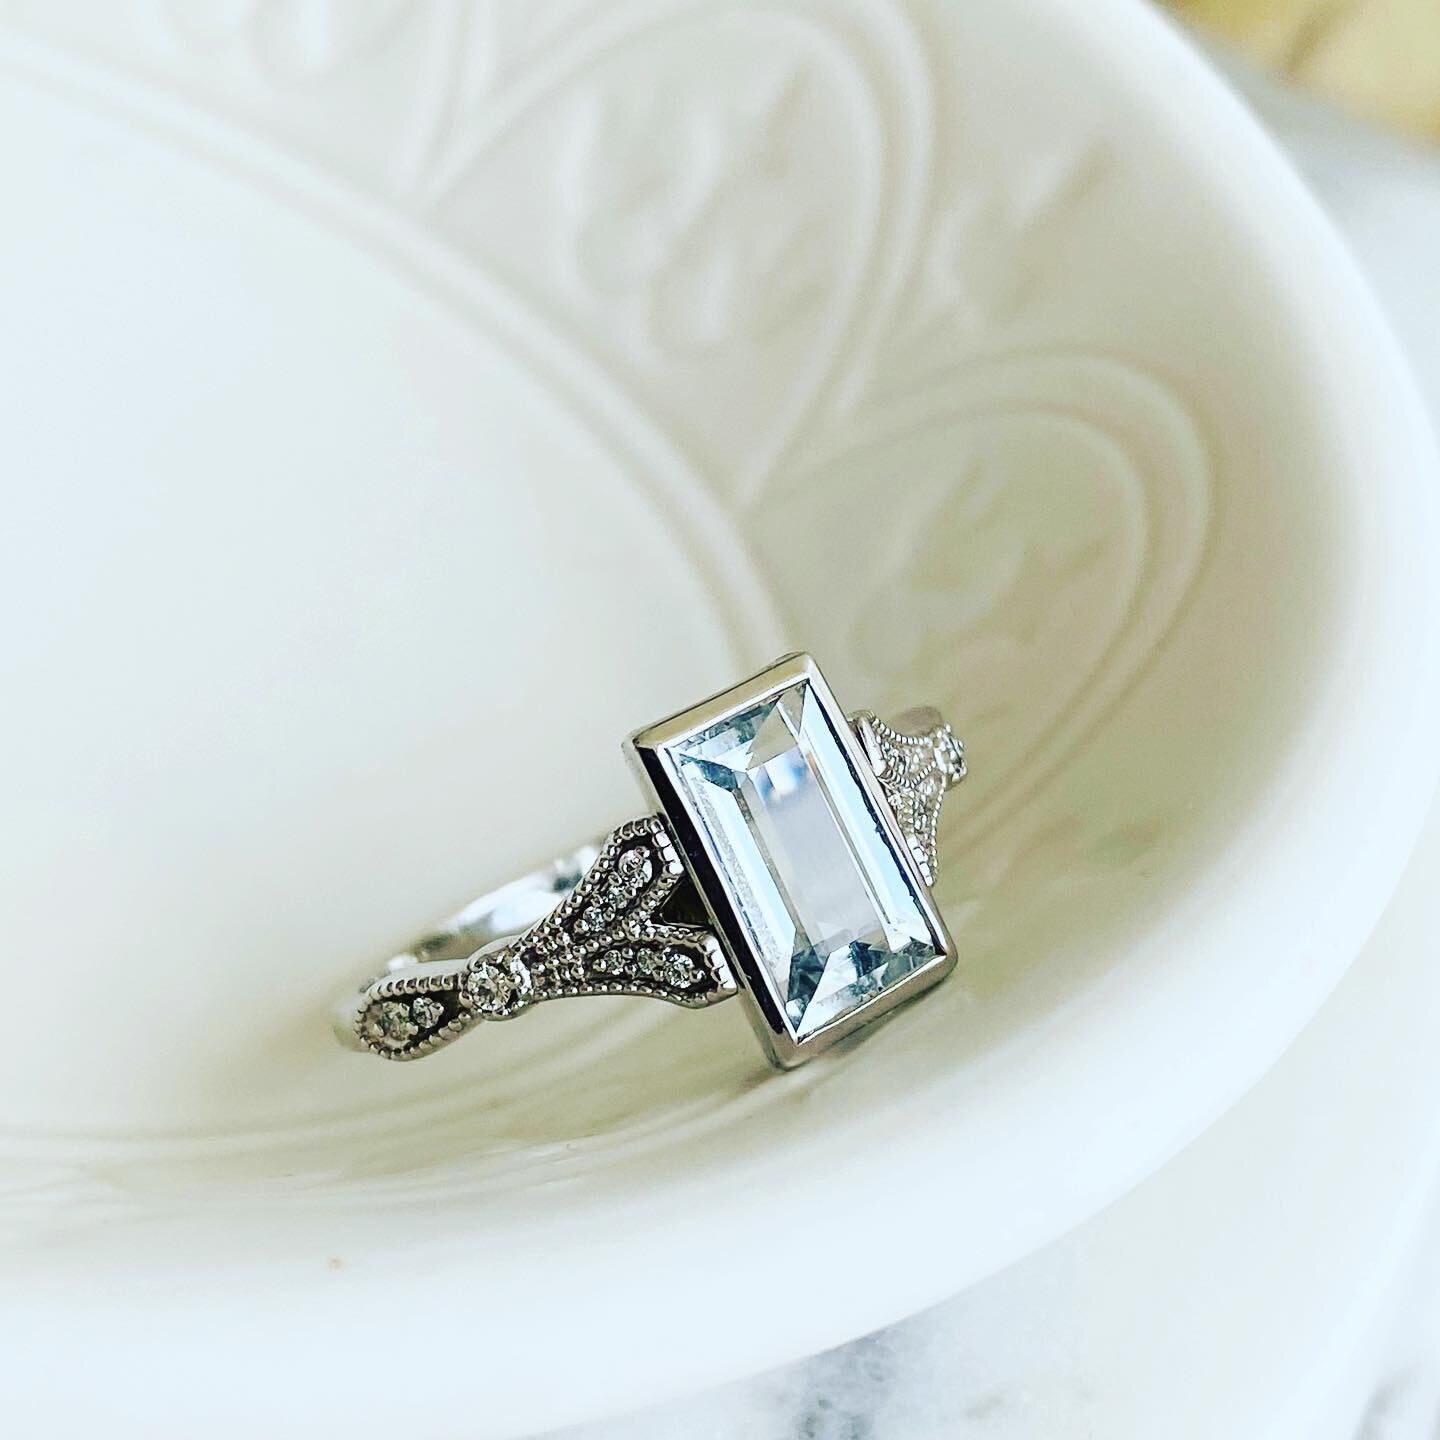 Icy blue hues ✨💍
⠀⠀⠀⠀⠀⠀⠀⠀⠀
Delicate #artdeco details on this custom Aquamarine ring that was picked up this week! Diamonds tapering in a silvery white gold custom setting + bezel set with an elongated baguette cut light Sky blue Aquamarine✨